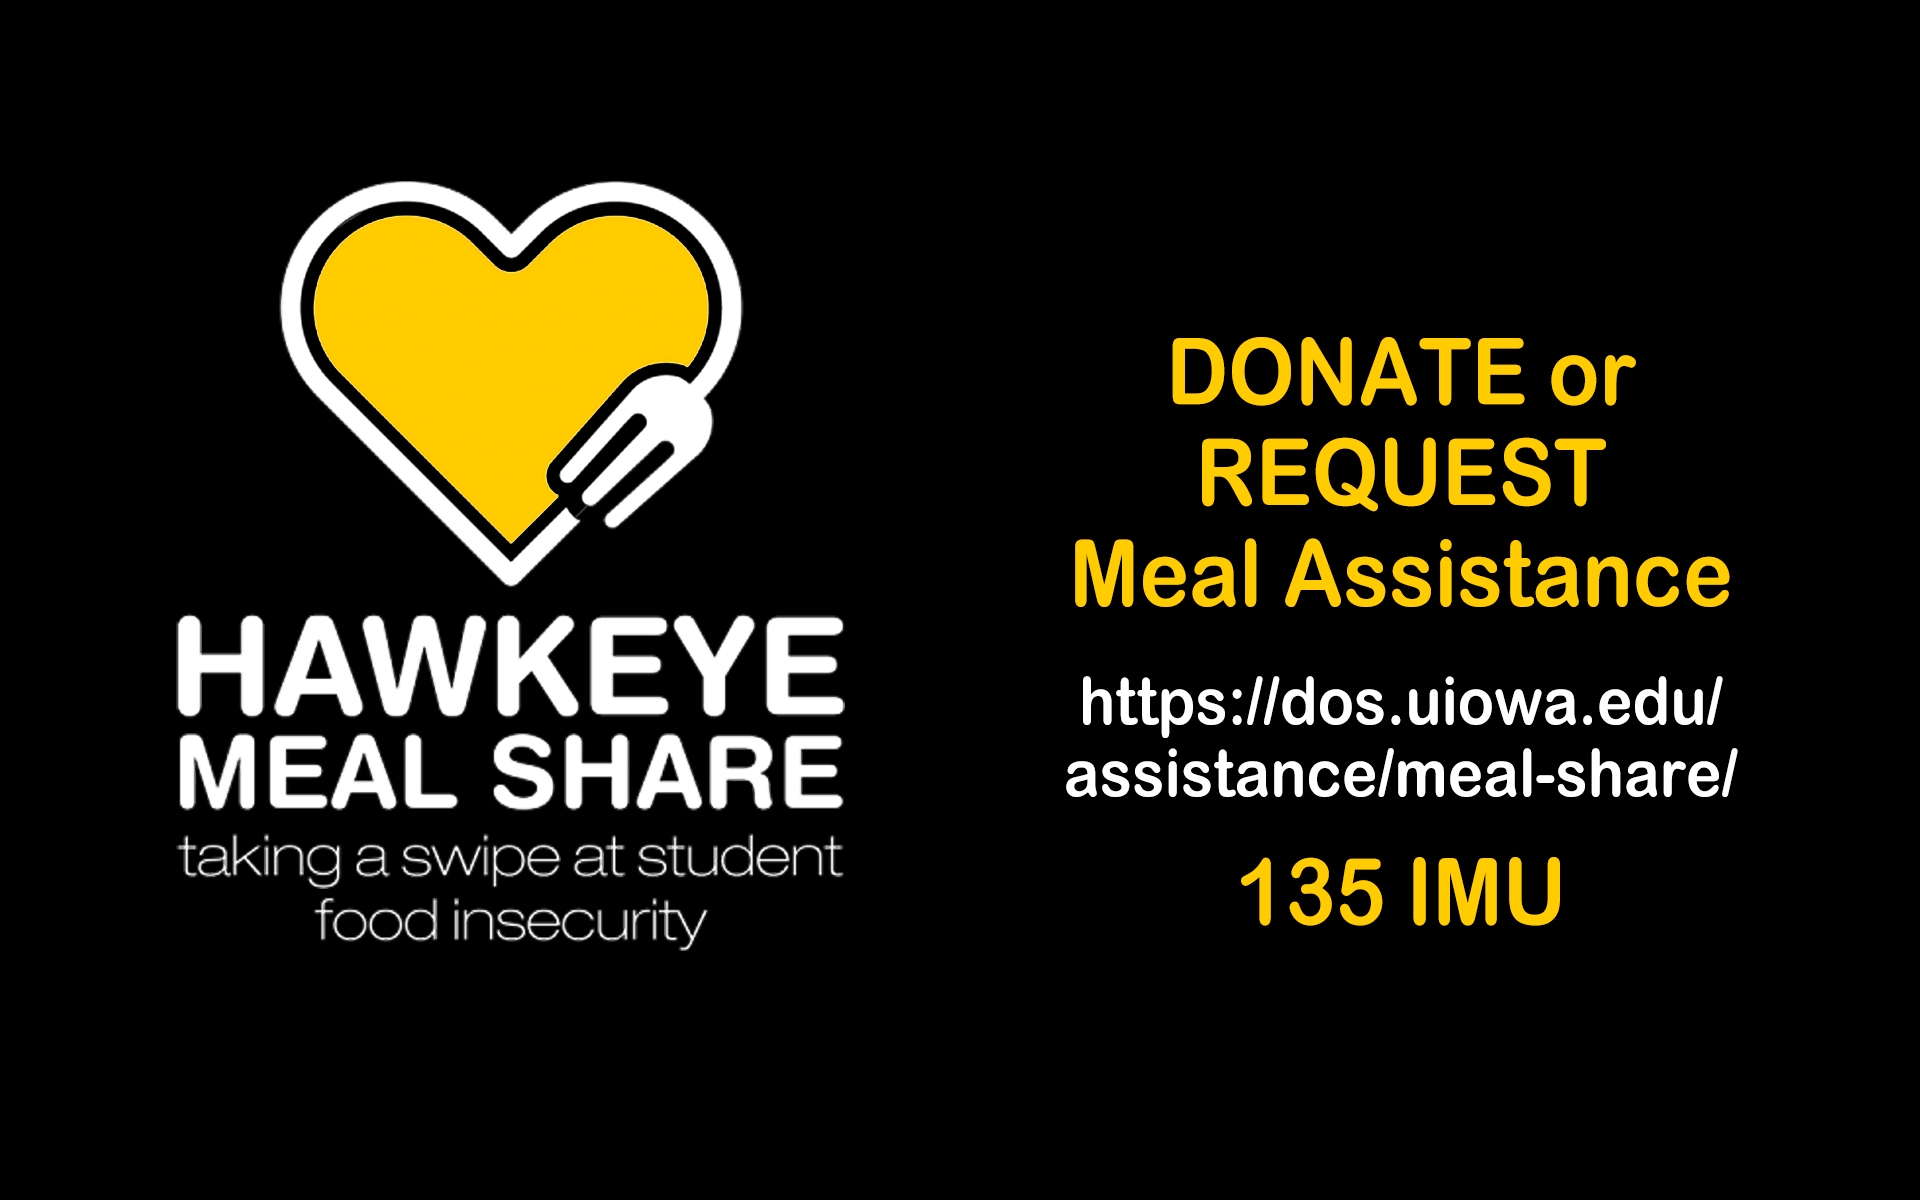 Hawkeye Meal Share - taking a swipe at student food insecurity. Donate or Request meal assistance. https://dos.uiowa.edu/assistance/meal-share/ or see us in 135 IMU.